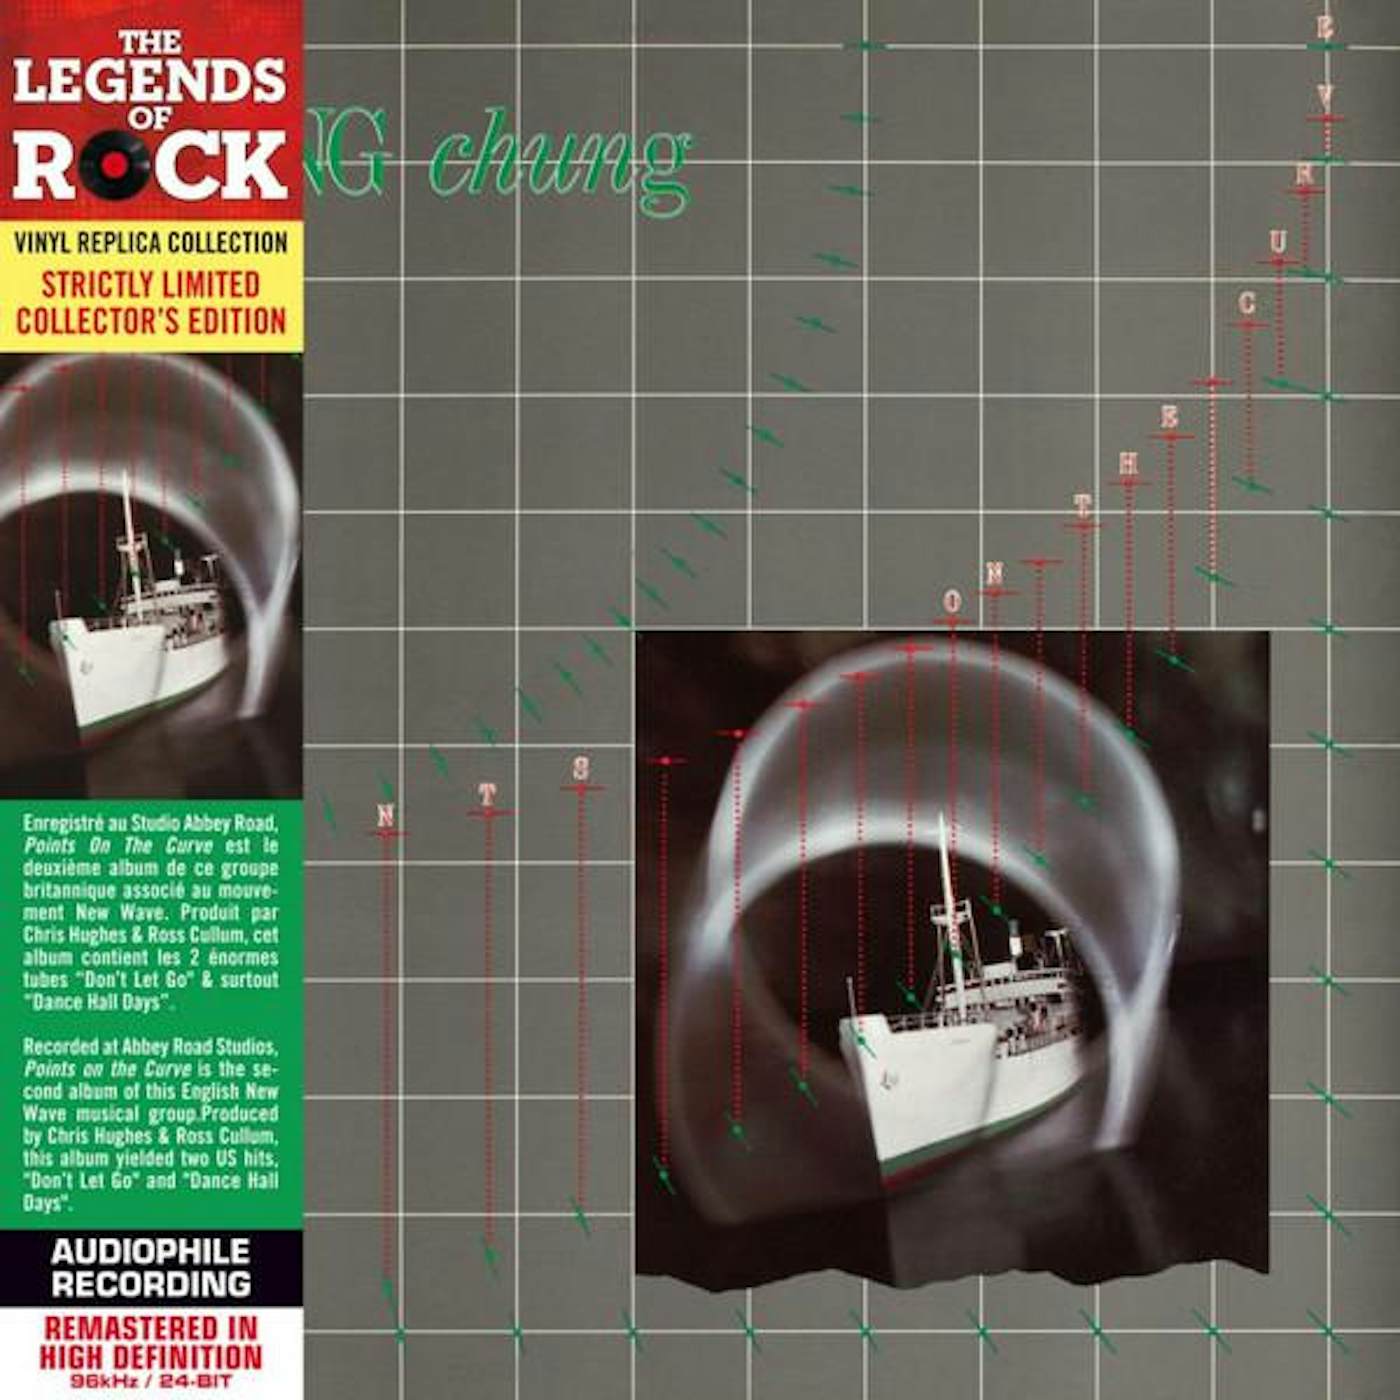 Wang Chung CD - Points On The Curve